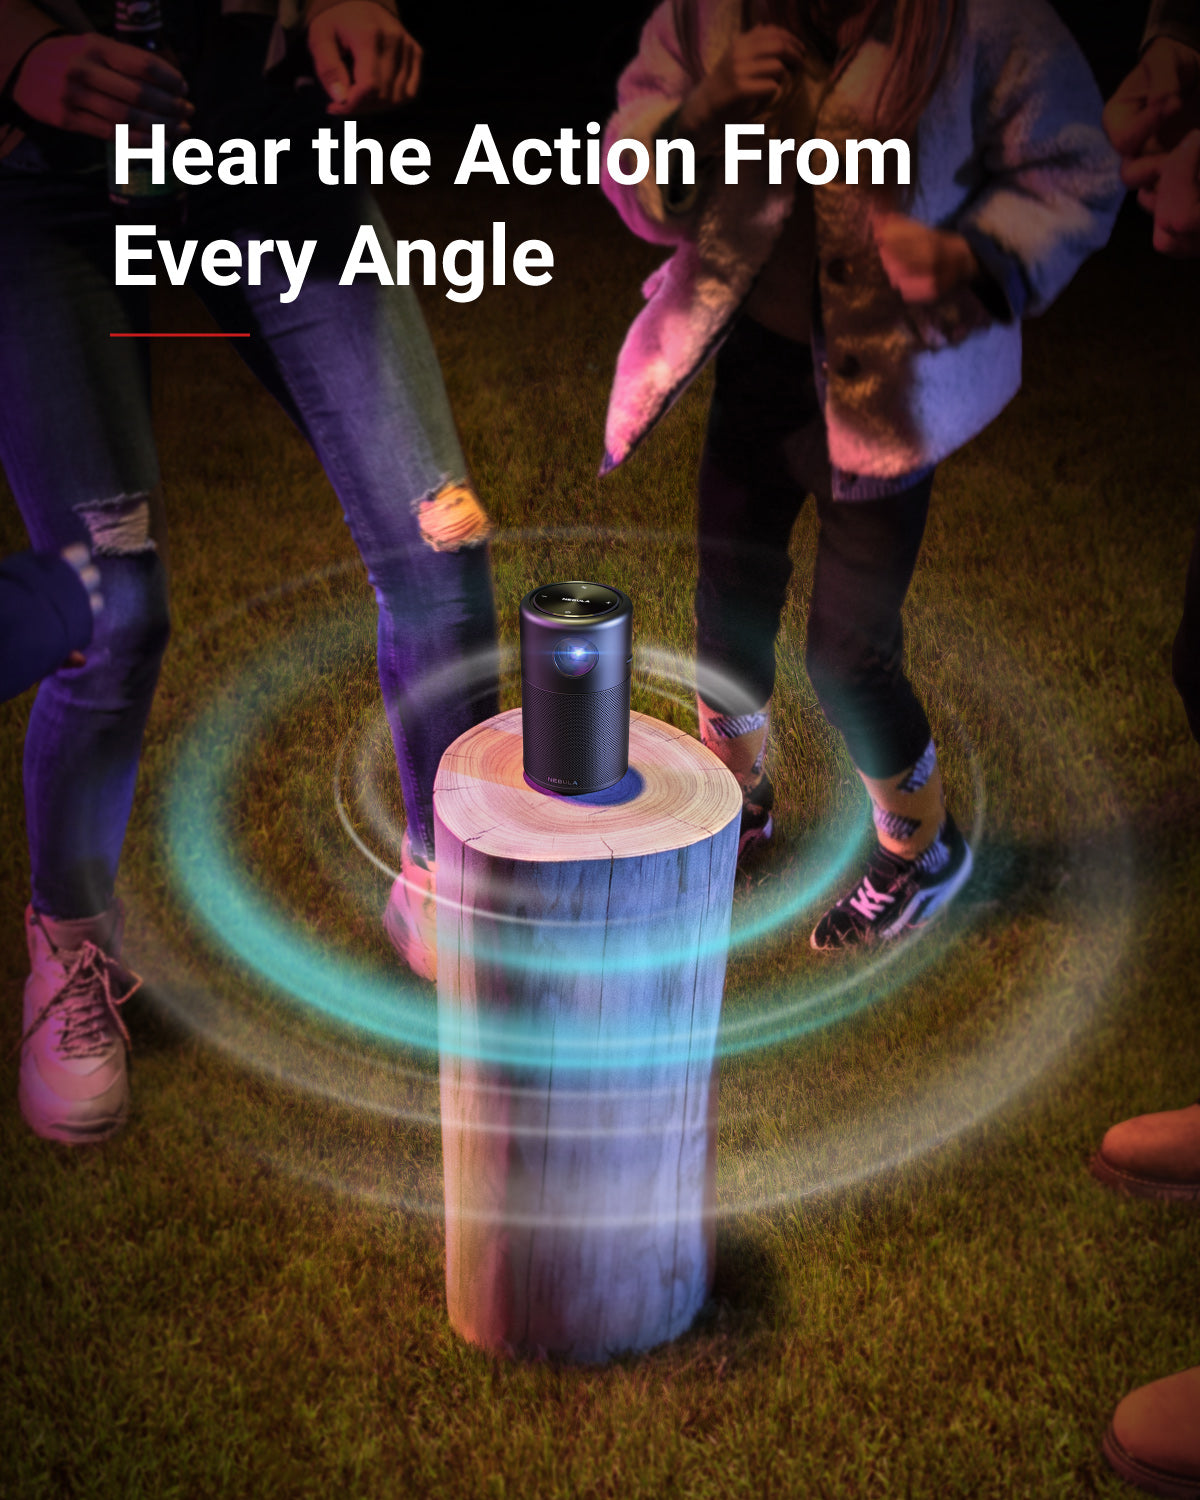 People dance around a Nebula Capsule portable projector, which sits on top of a log and has swirls emanating from it.